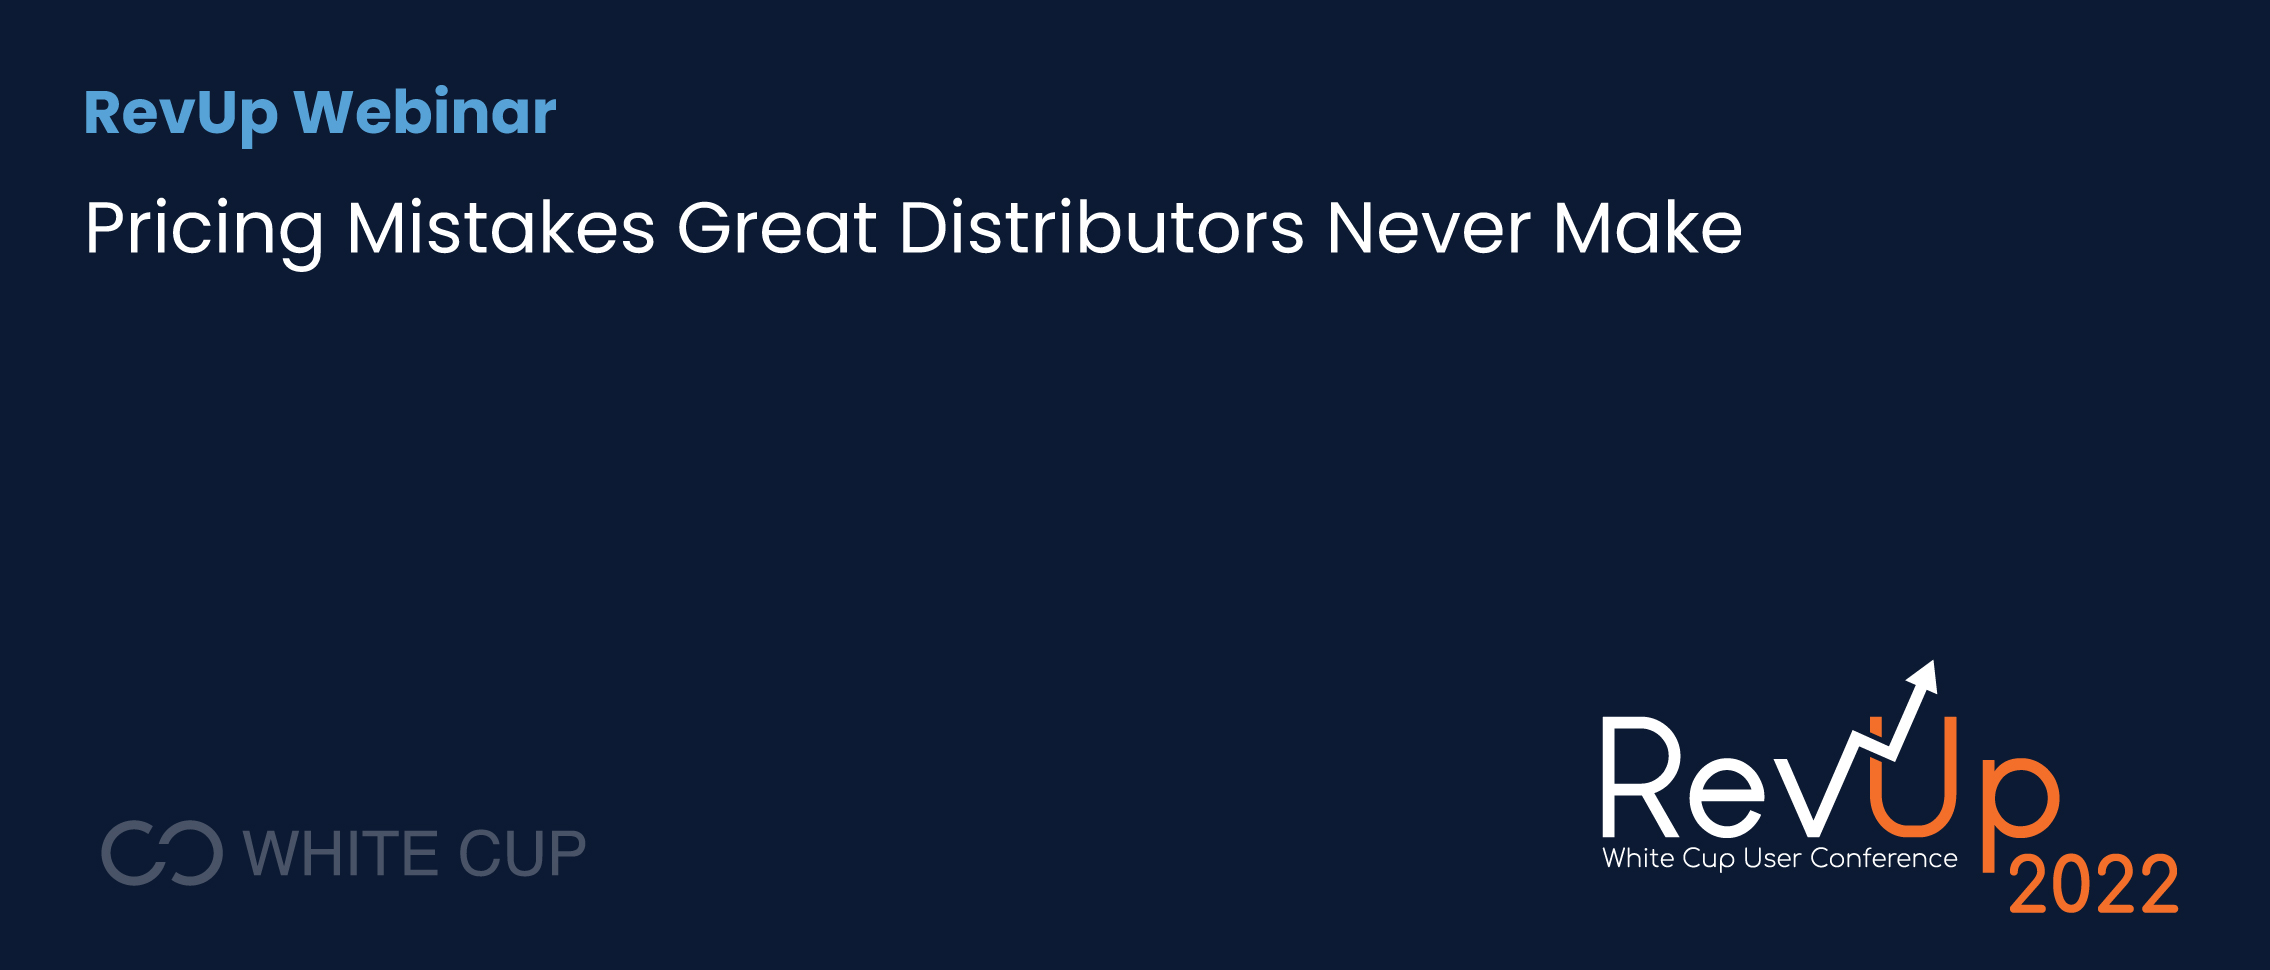 Pricing Mistakes Great Distributors Never Make